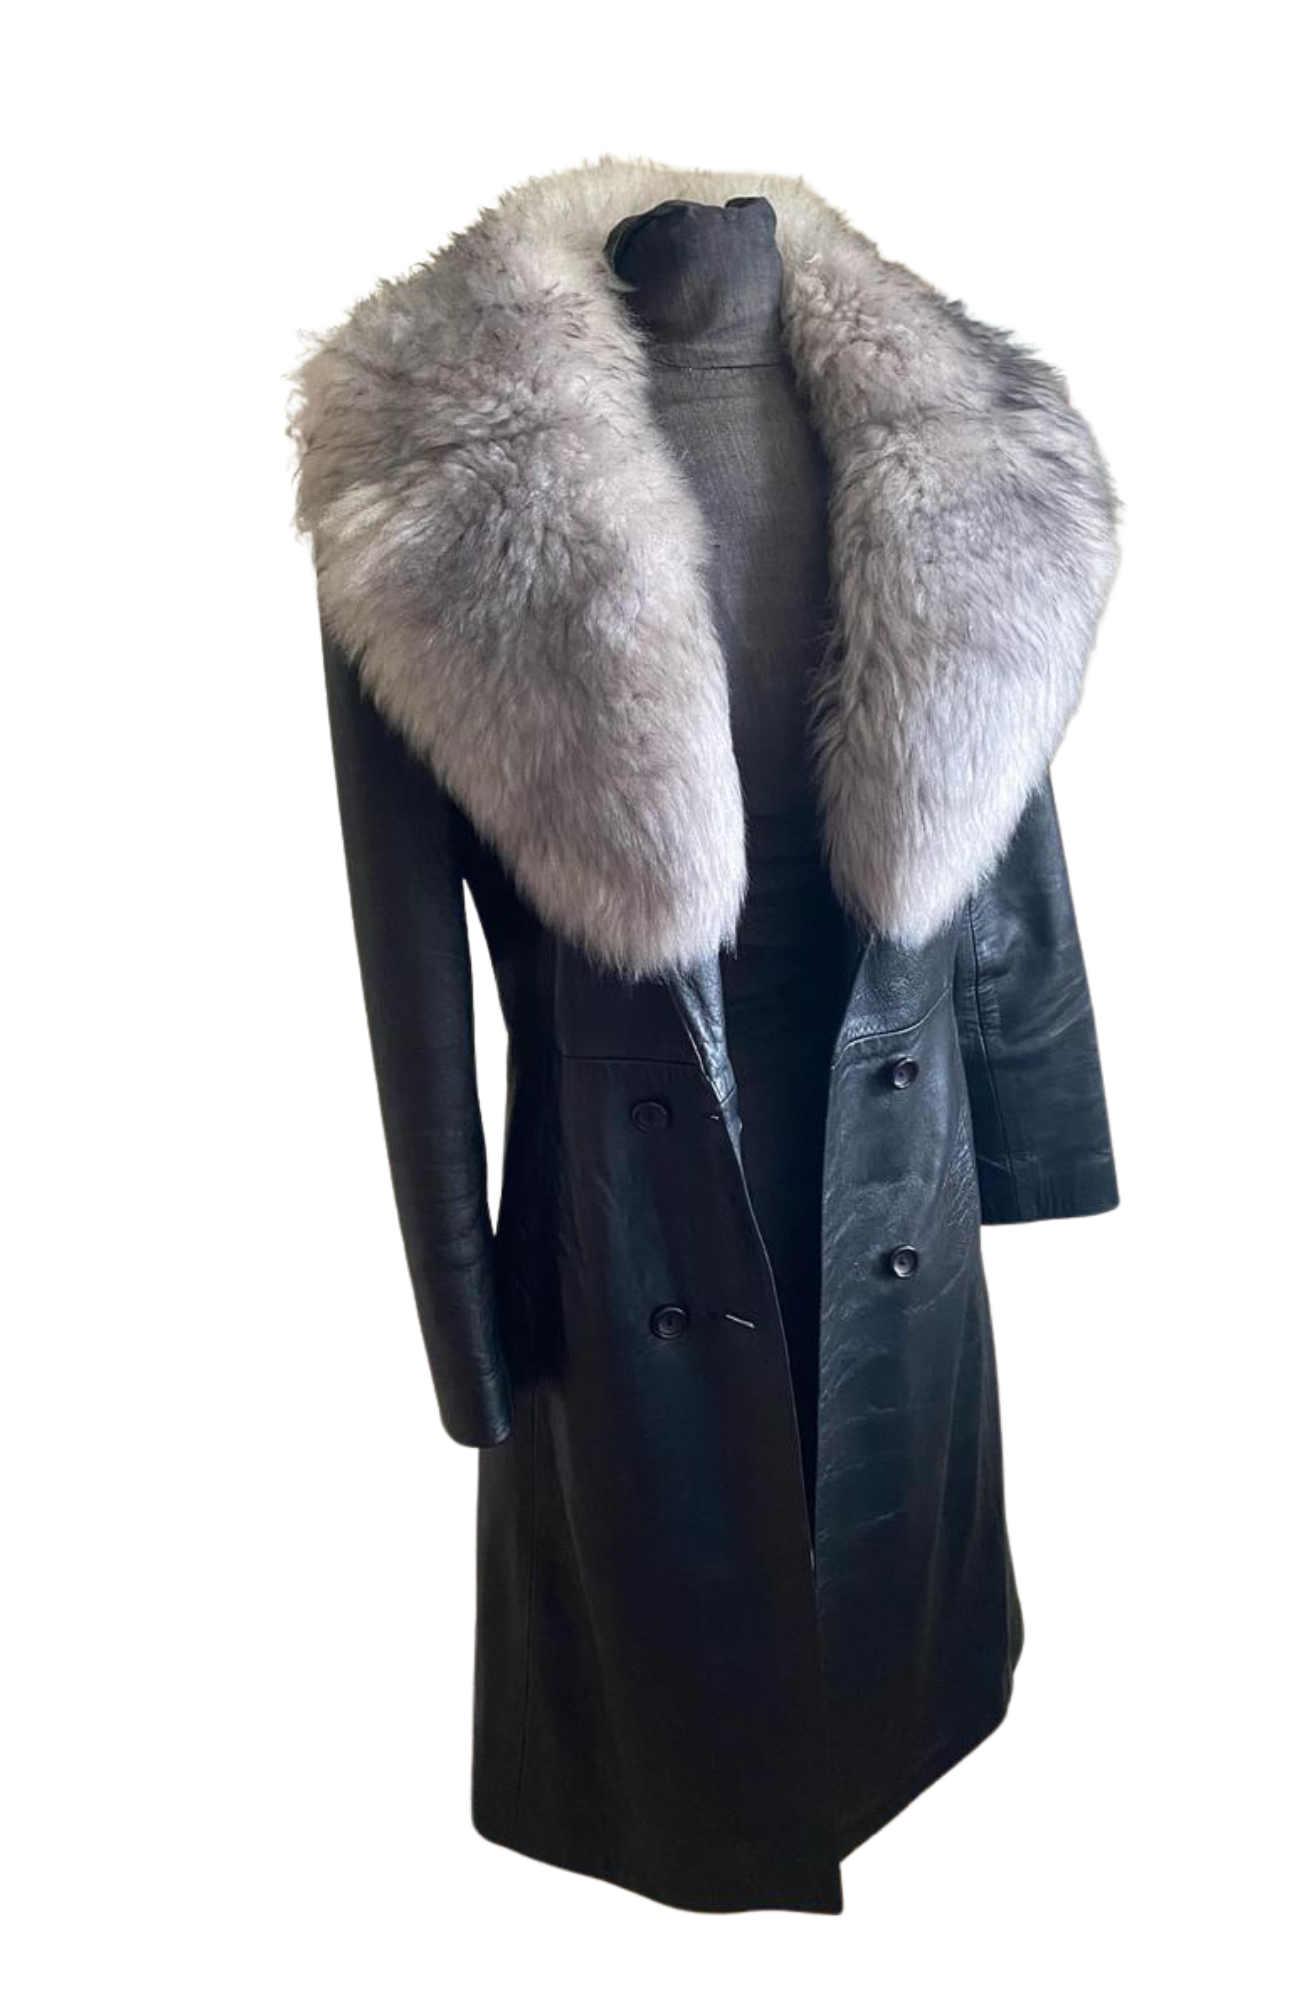 Vintage Leather Coat with Sheepskin collar - Rock the Jumpsuit